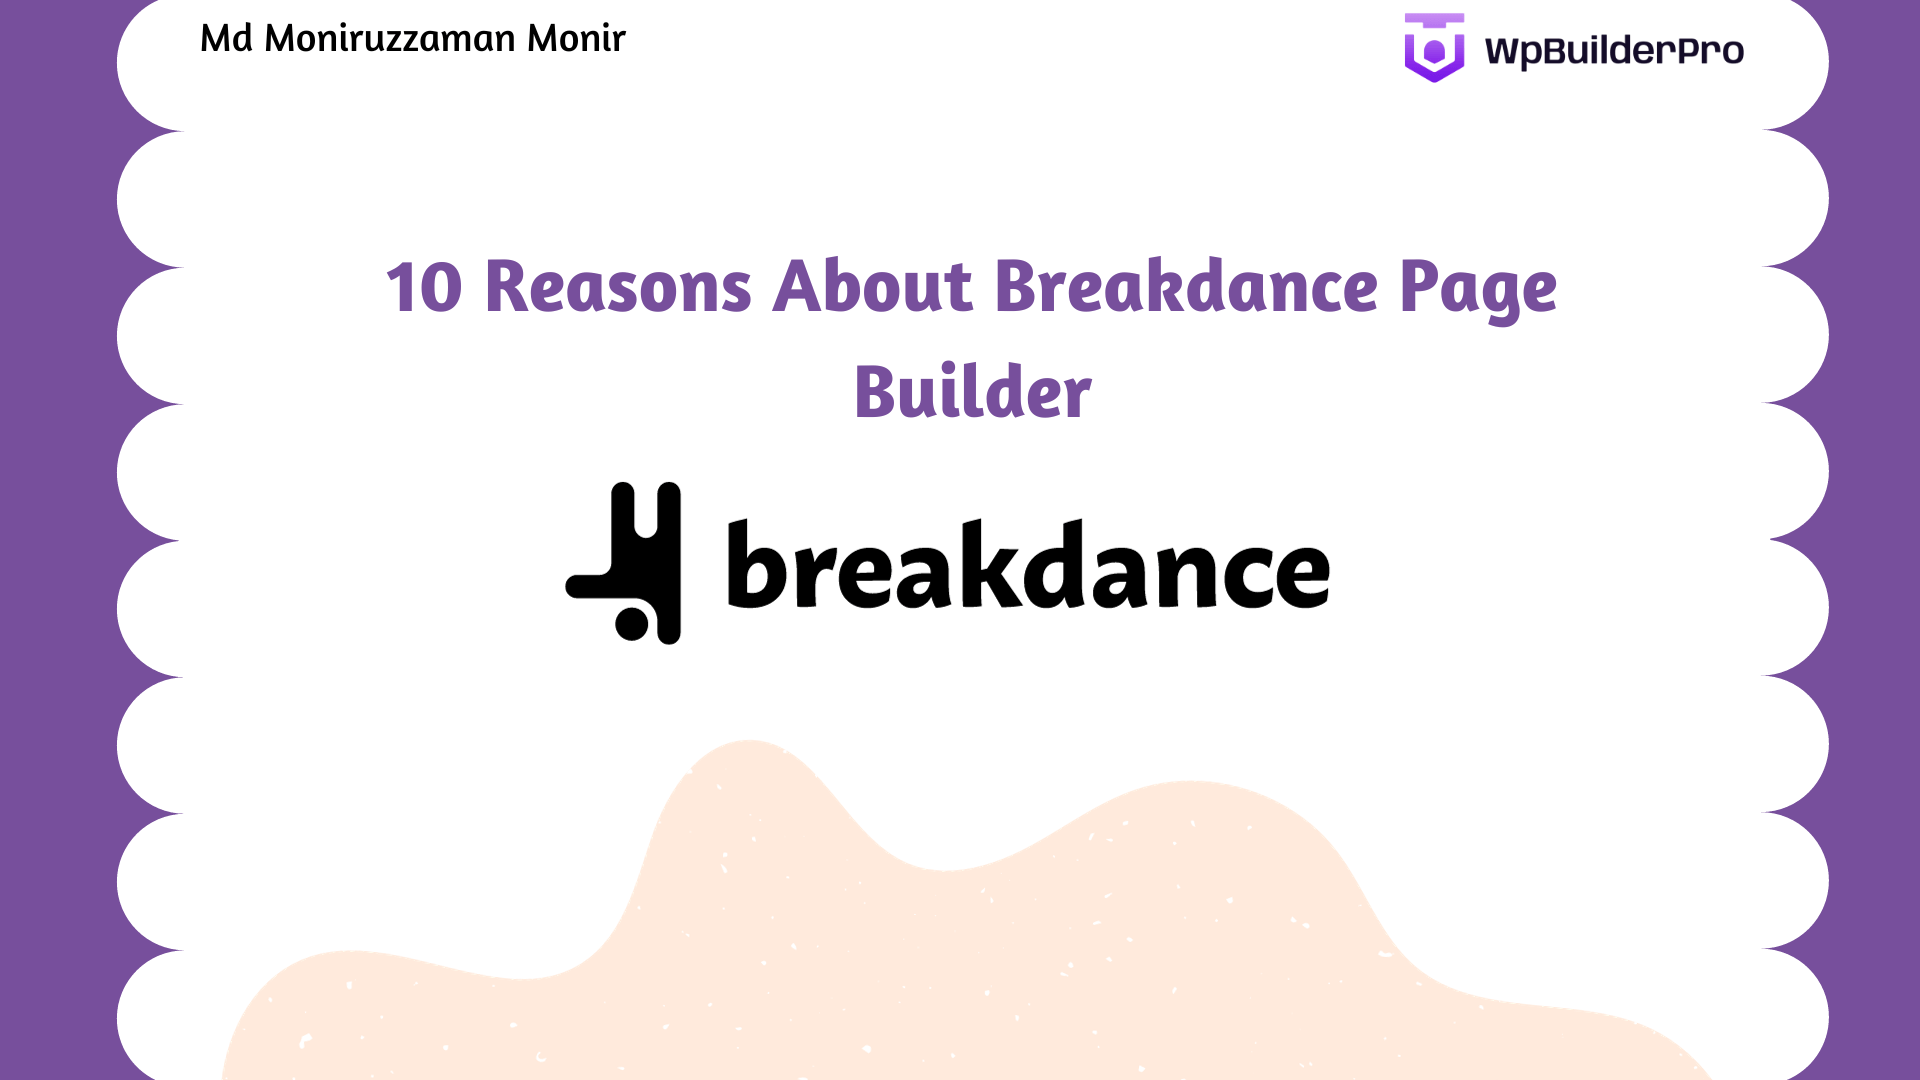 10 Reasons About Breakdance Page Builder